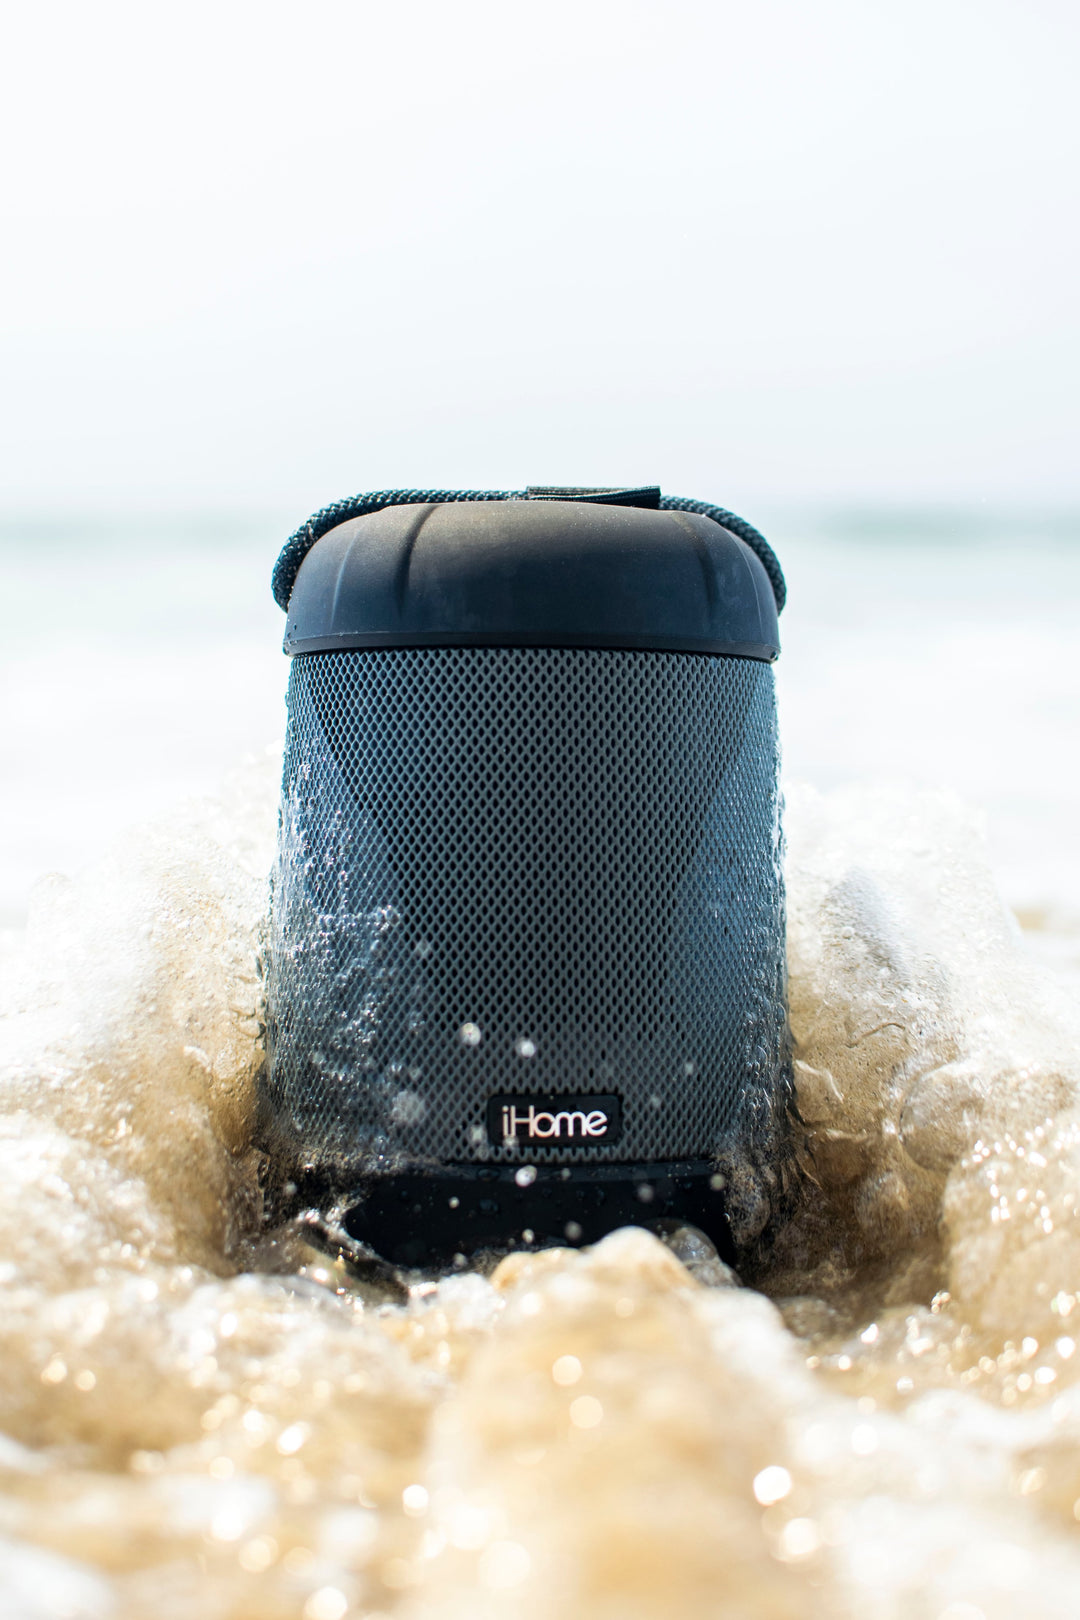 iHome - PlayTough Pro - Bluetooth Rechargeable Waterproof Portable Speaker with 360° Stereo Sound - Black_2